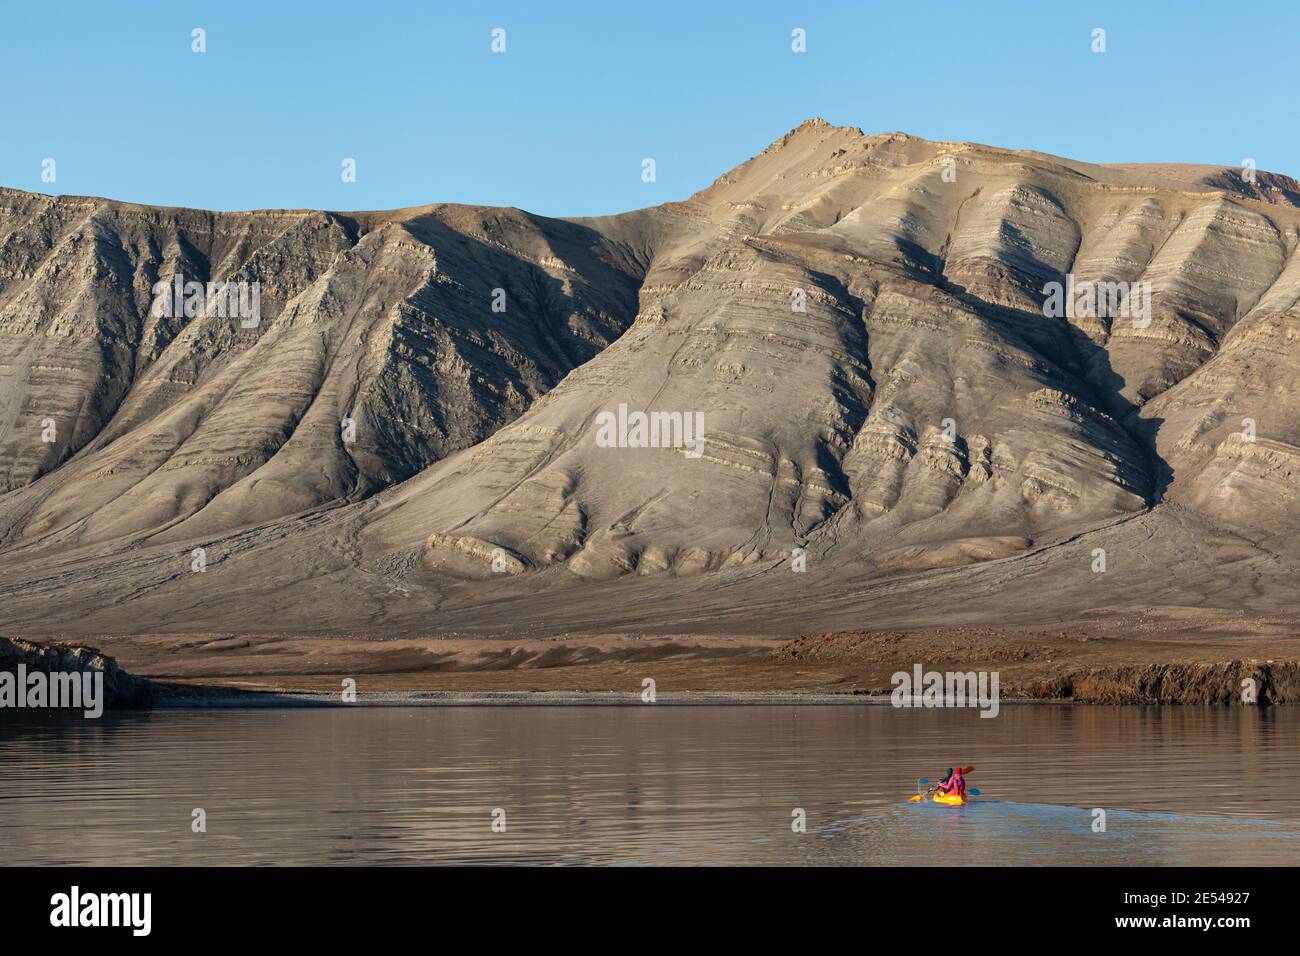 A person in a orange kayak paddling towards mountains in Baffin Bay Stock Photo